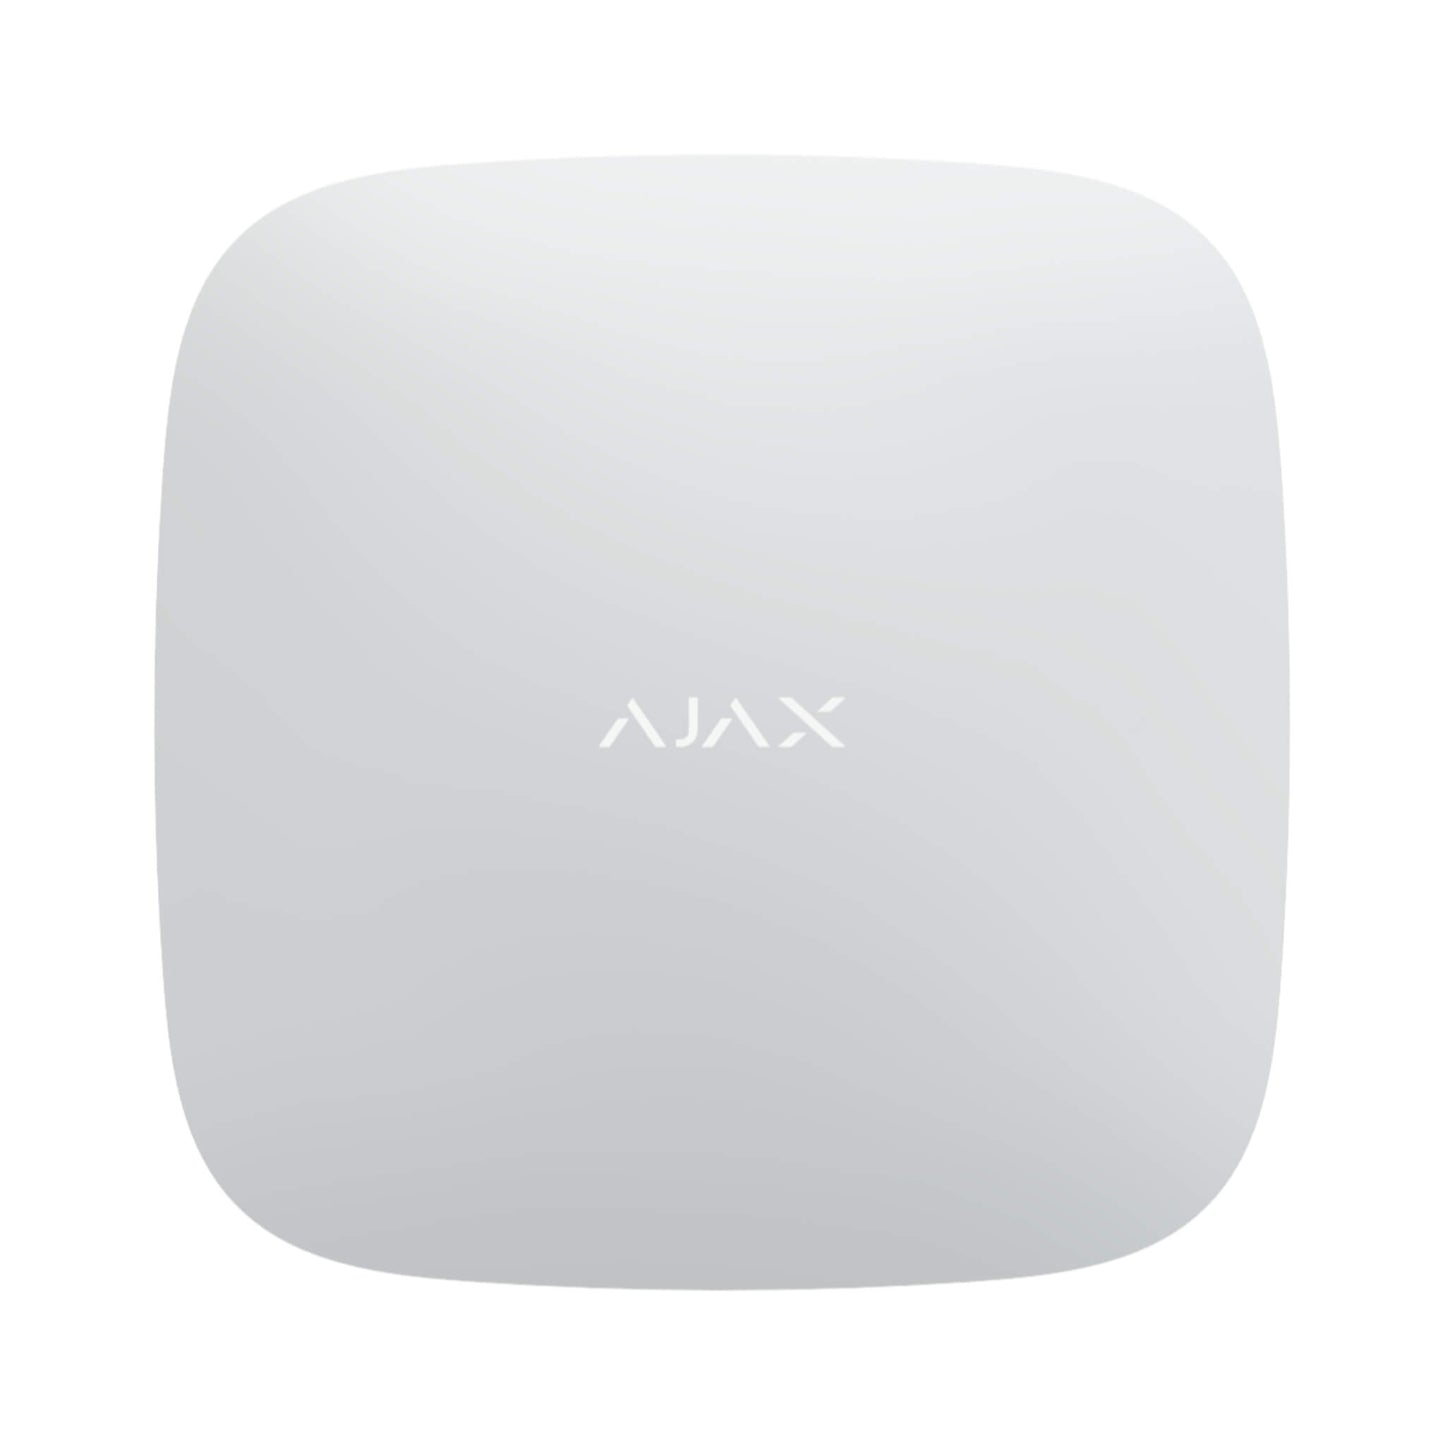 Ajax Security Systems White ReX Radio range extender for Ajax Systems, for Home and Business security, 163 × 163 × 36 mm in size, 330 grams in weight , rated for Indoor use IP50, Front view of Device.